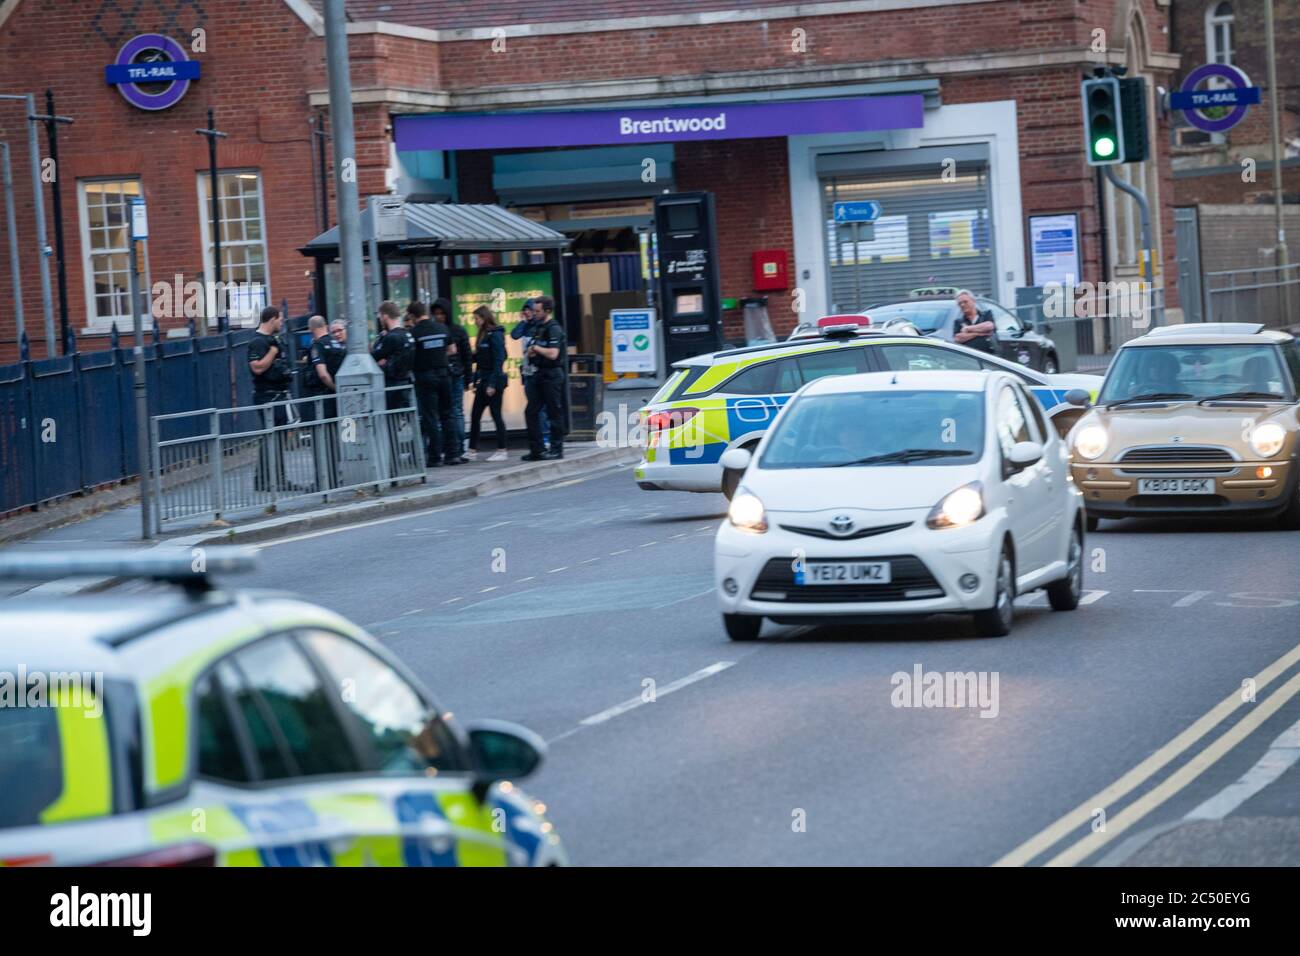 Brentwood Essex 29th June 2020 Essex Police were mobilised to manage large groups of youths who had turned up in the town for a social media advertised rave that did not take place. Police patrolled Brentwood station and surrounds as youths sought to leave Brentwood Credit: Ian Davidson/Alamy Live News Stock Photo